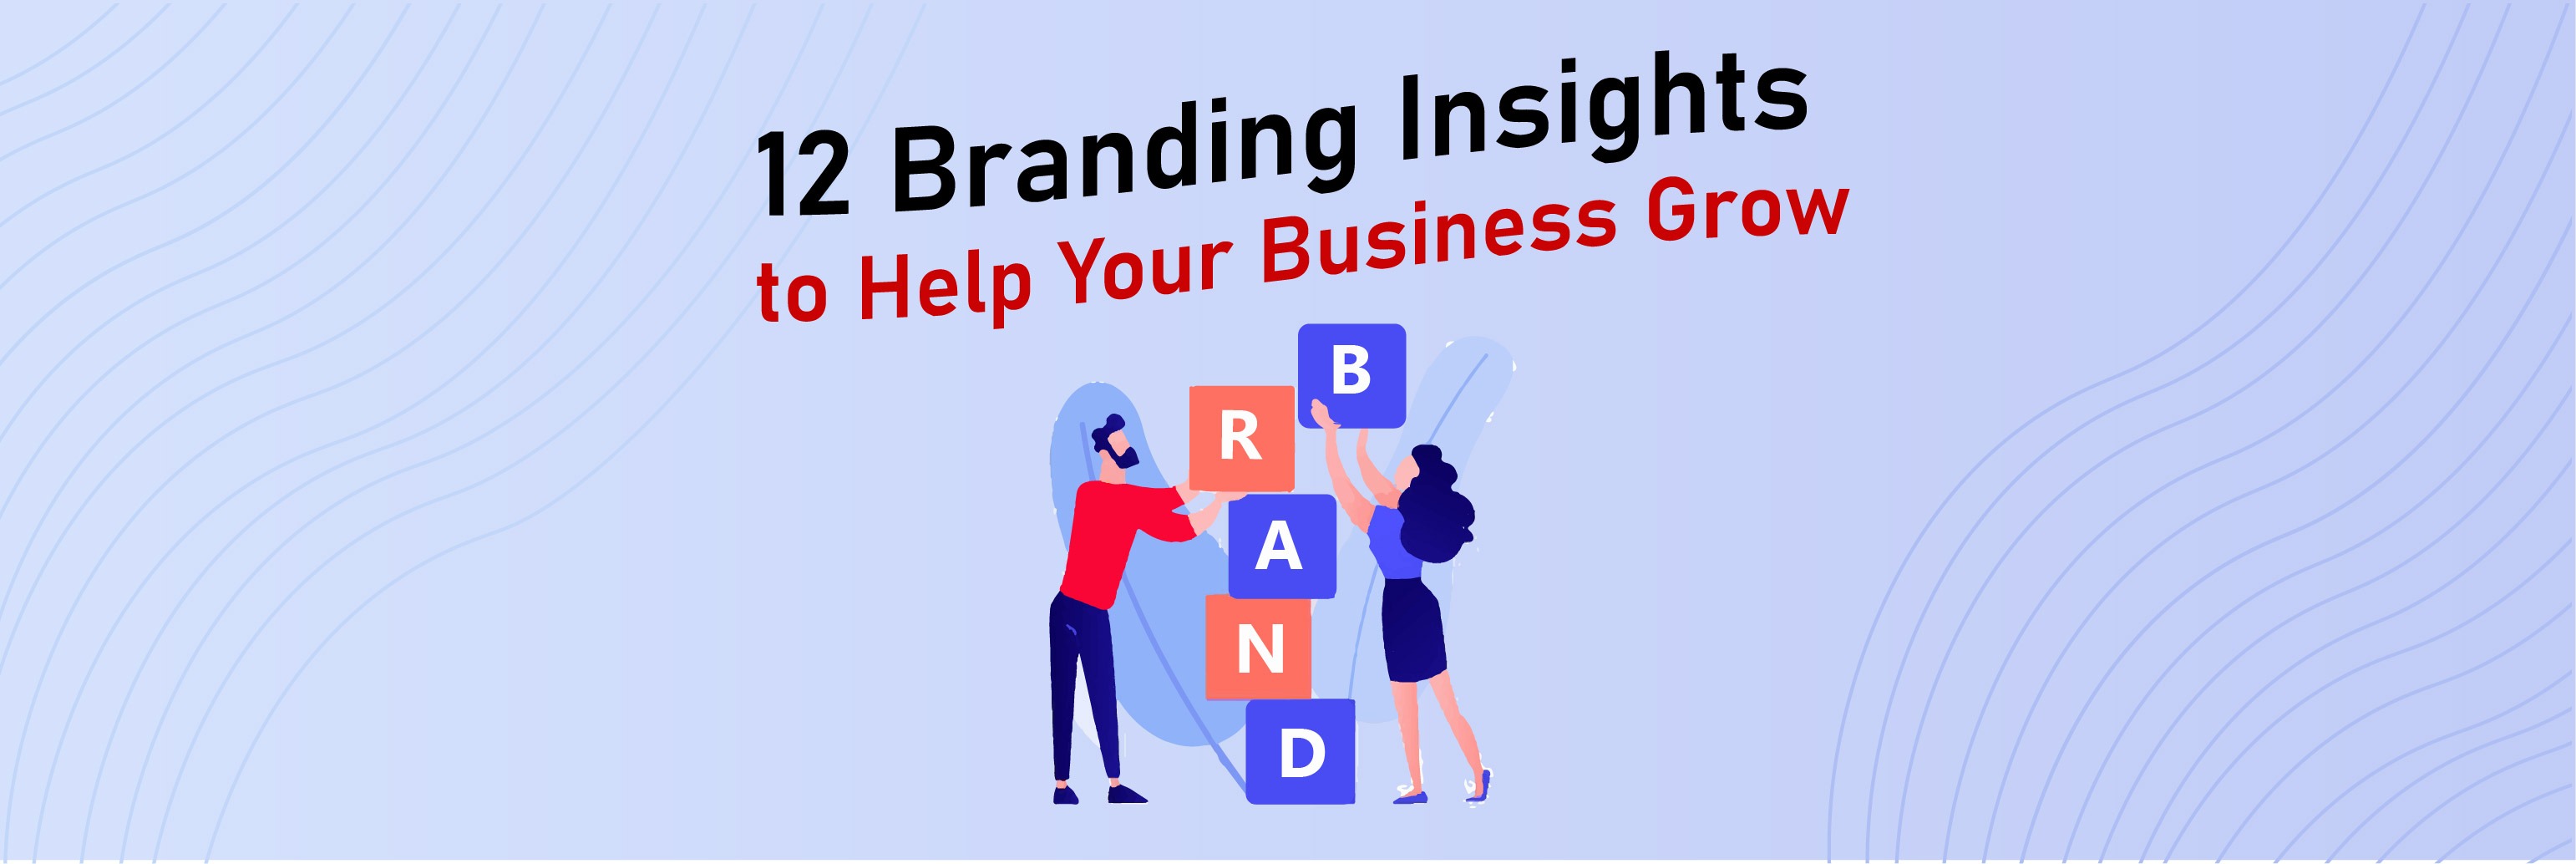 12 Branding Insights to Help Your Business Grow